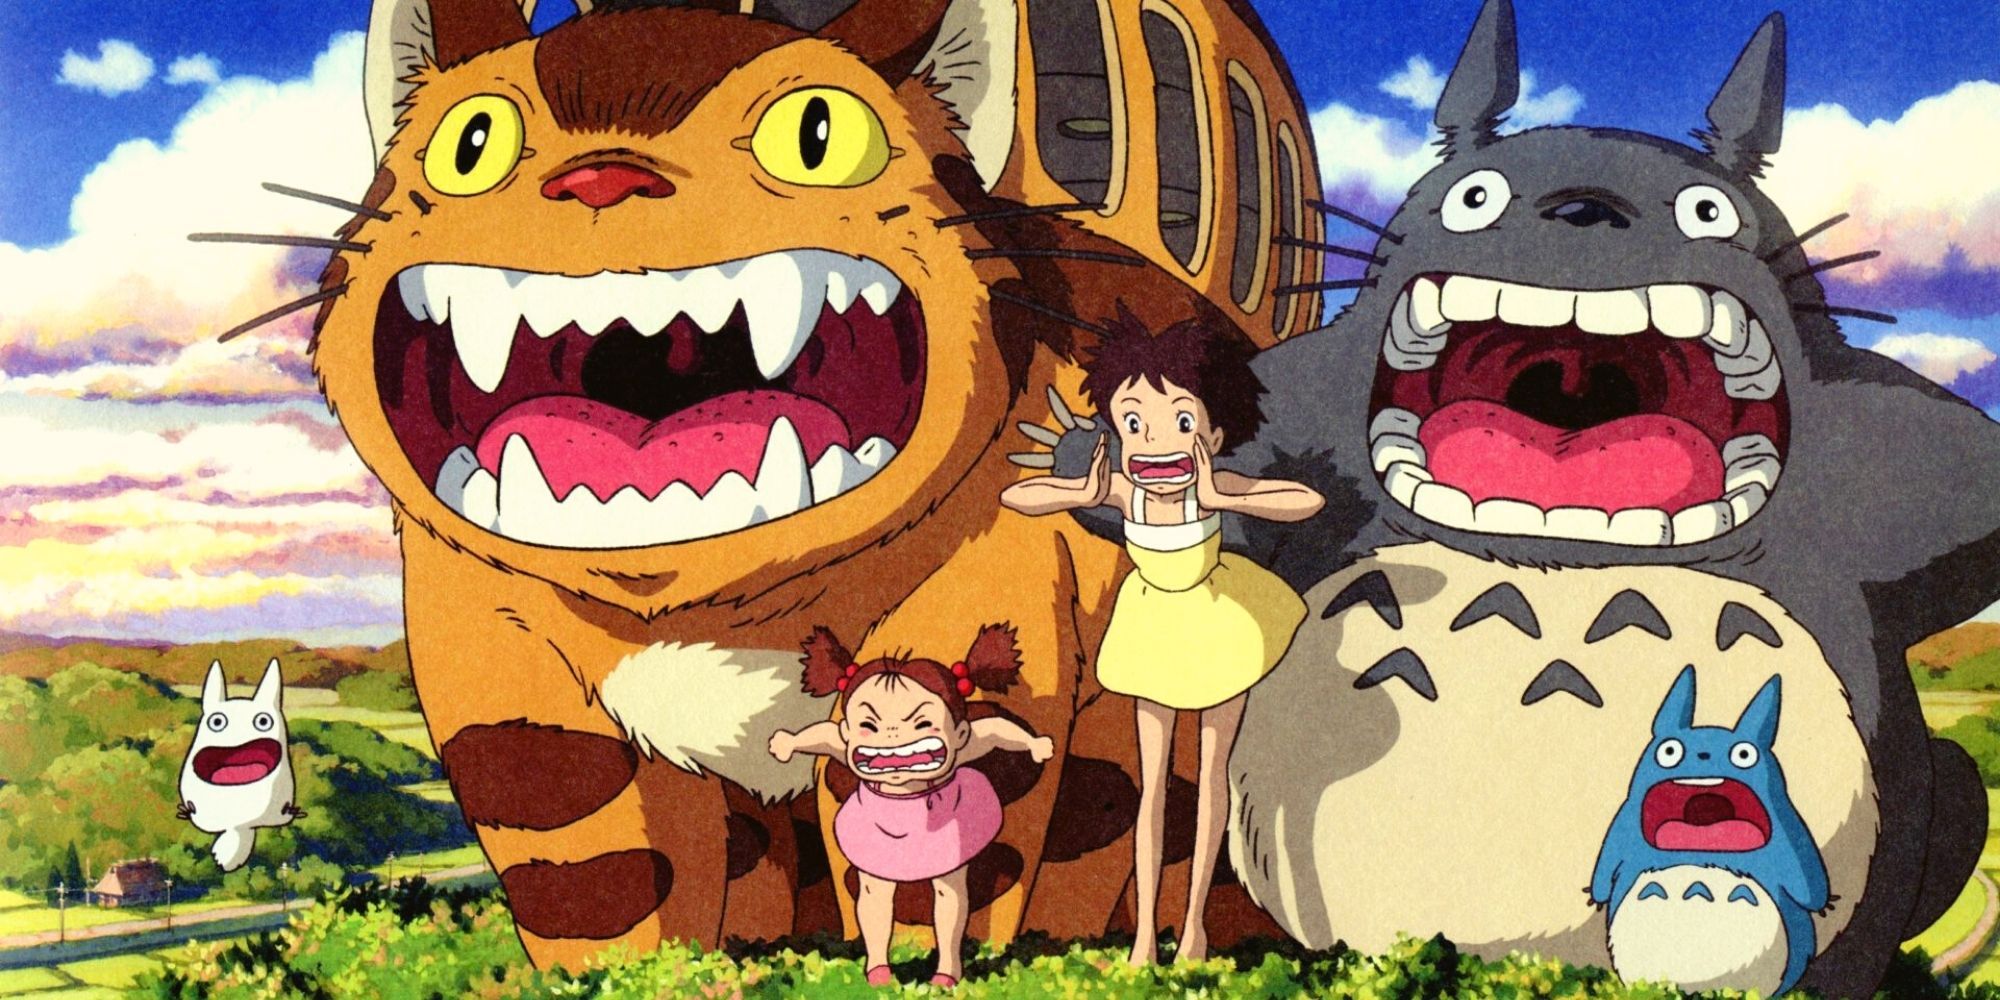 The kids in My Neighbor Totoro with the Catbus and the small Totoros